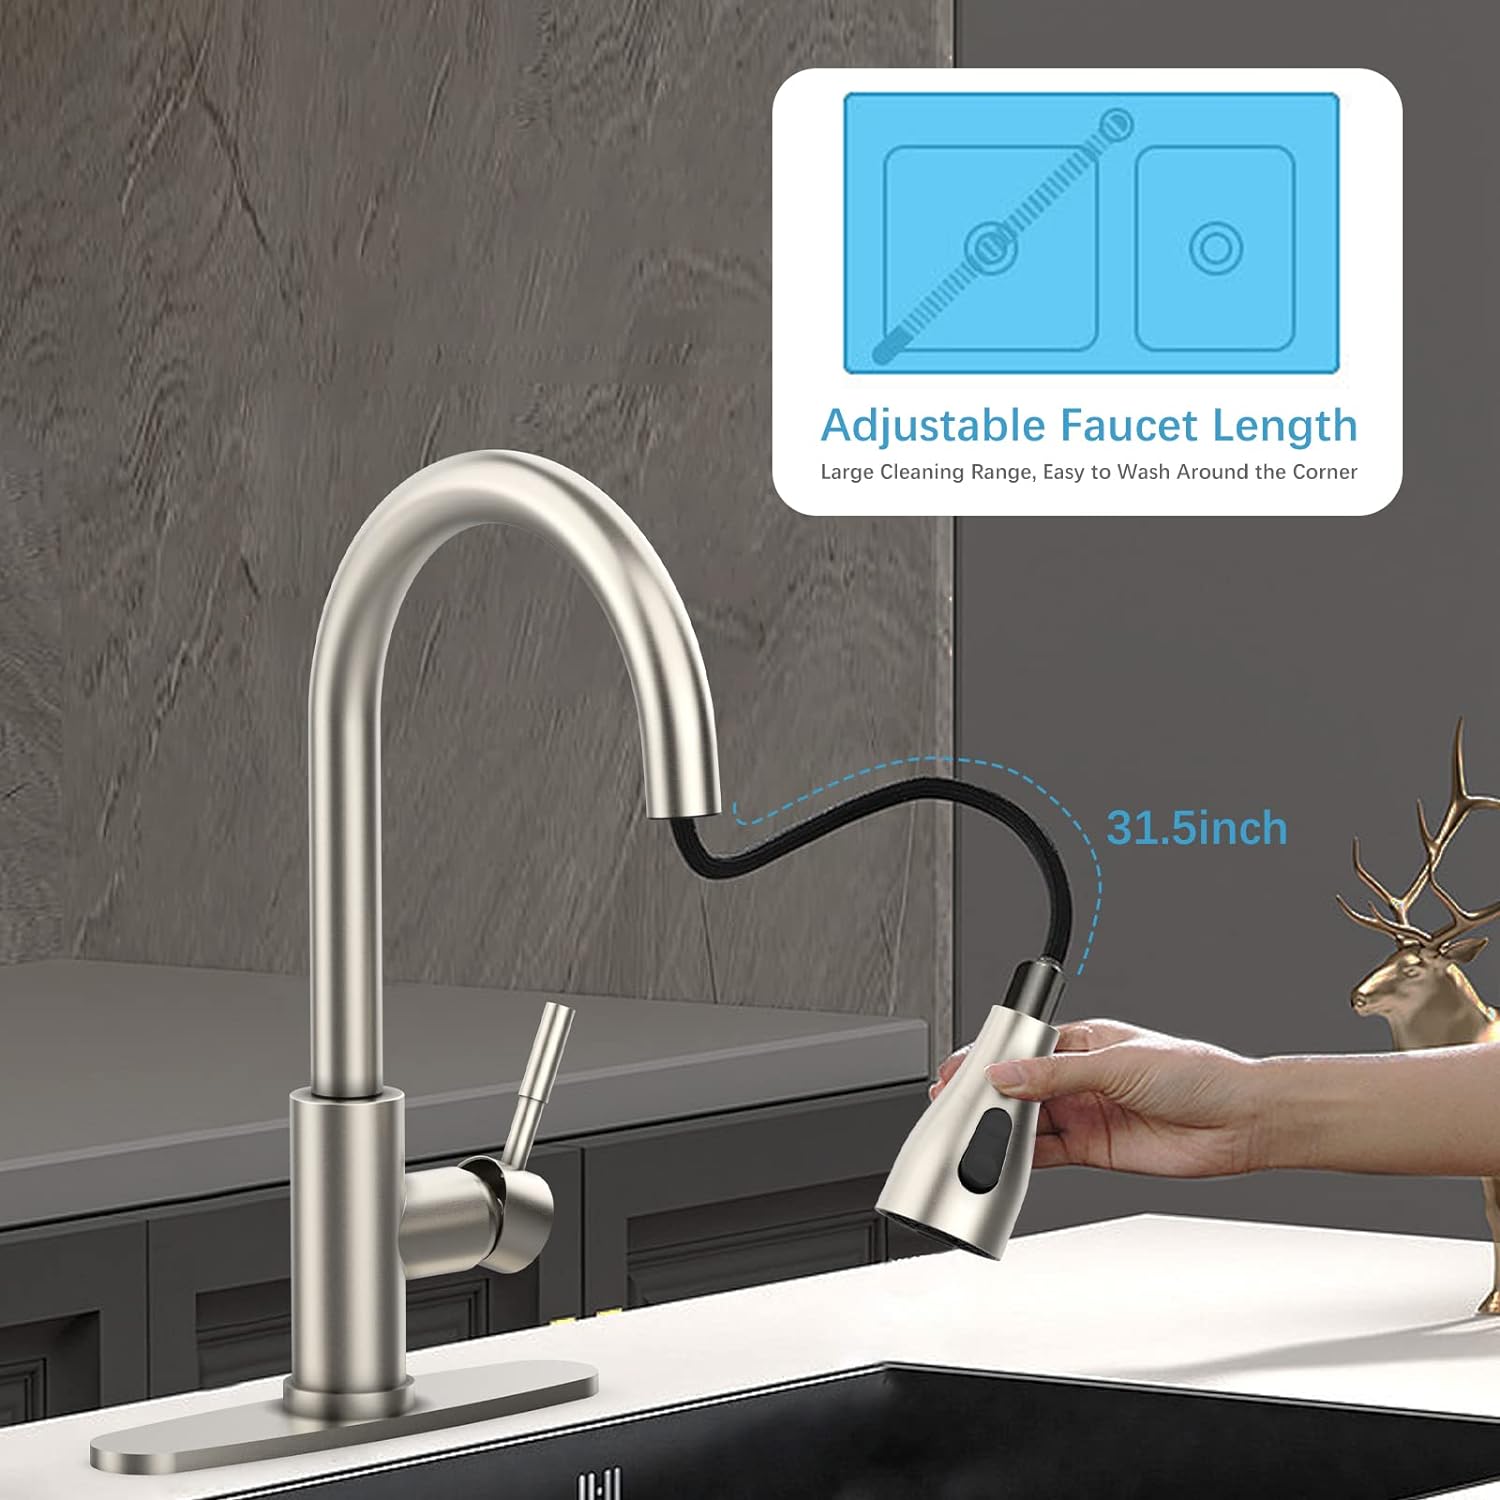 Kitchen Drinking Water Faucet - 100% -Free, Stainless Steel 304, Compatible with Filtration Systems